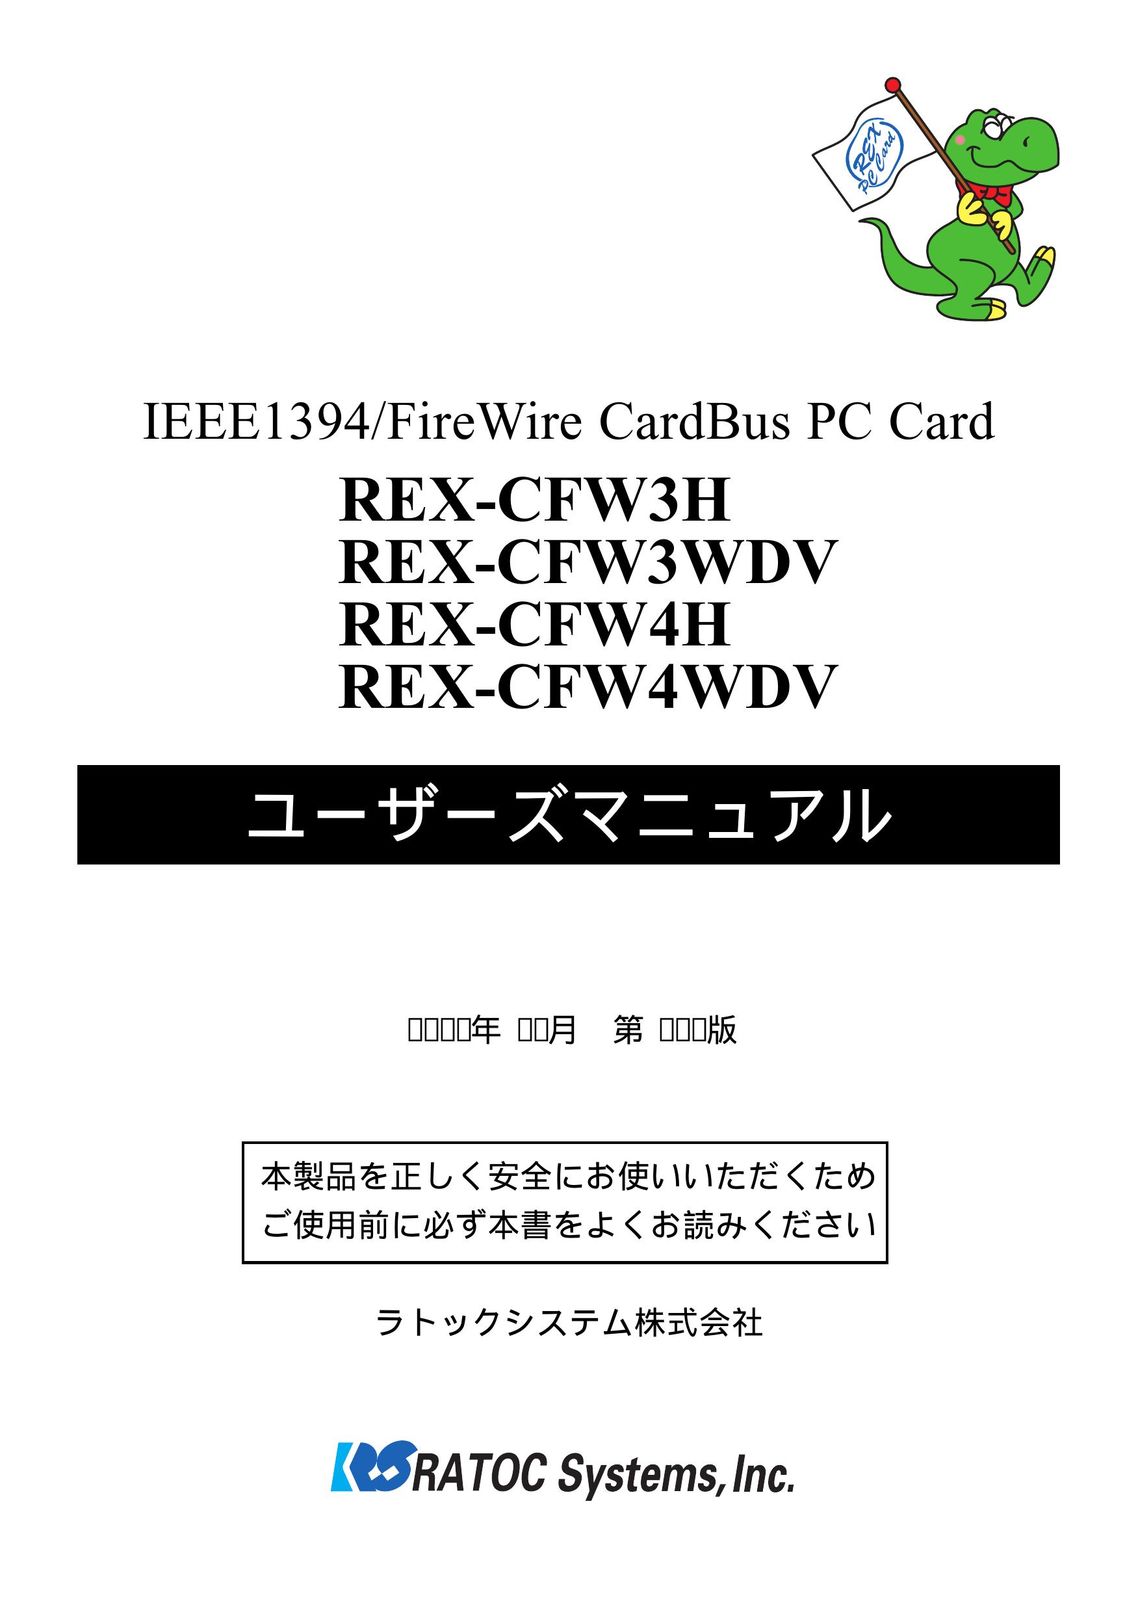 Ratoc Systems REX-CFW4H Network Card User Manual